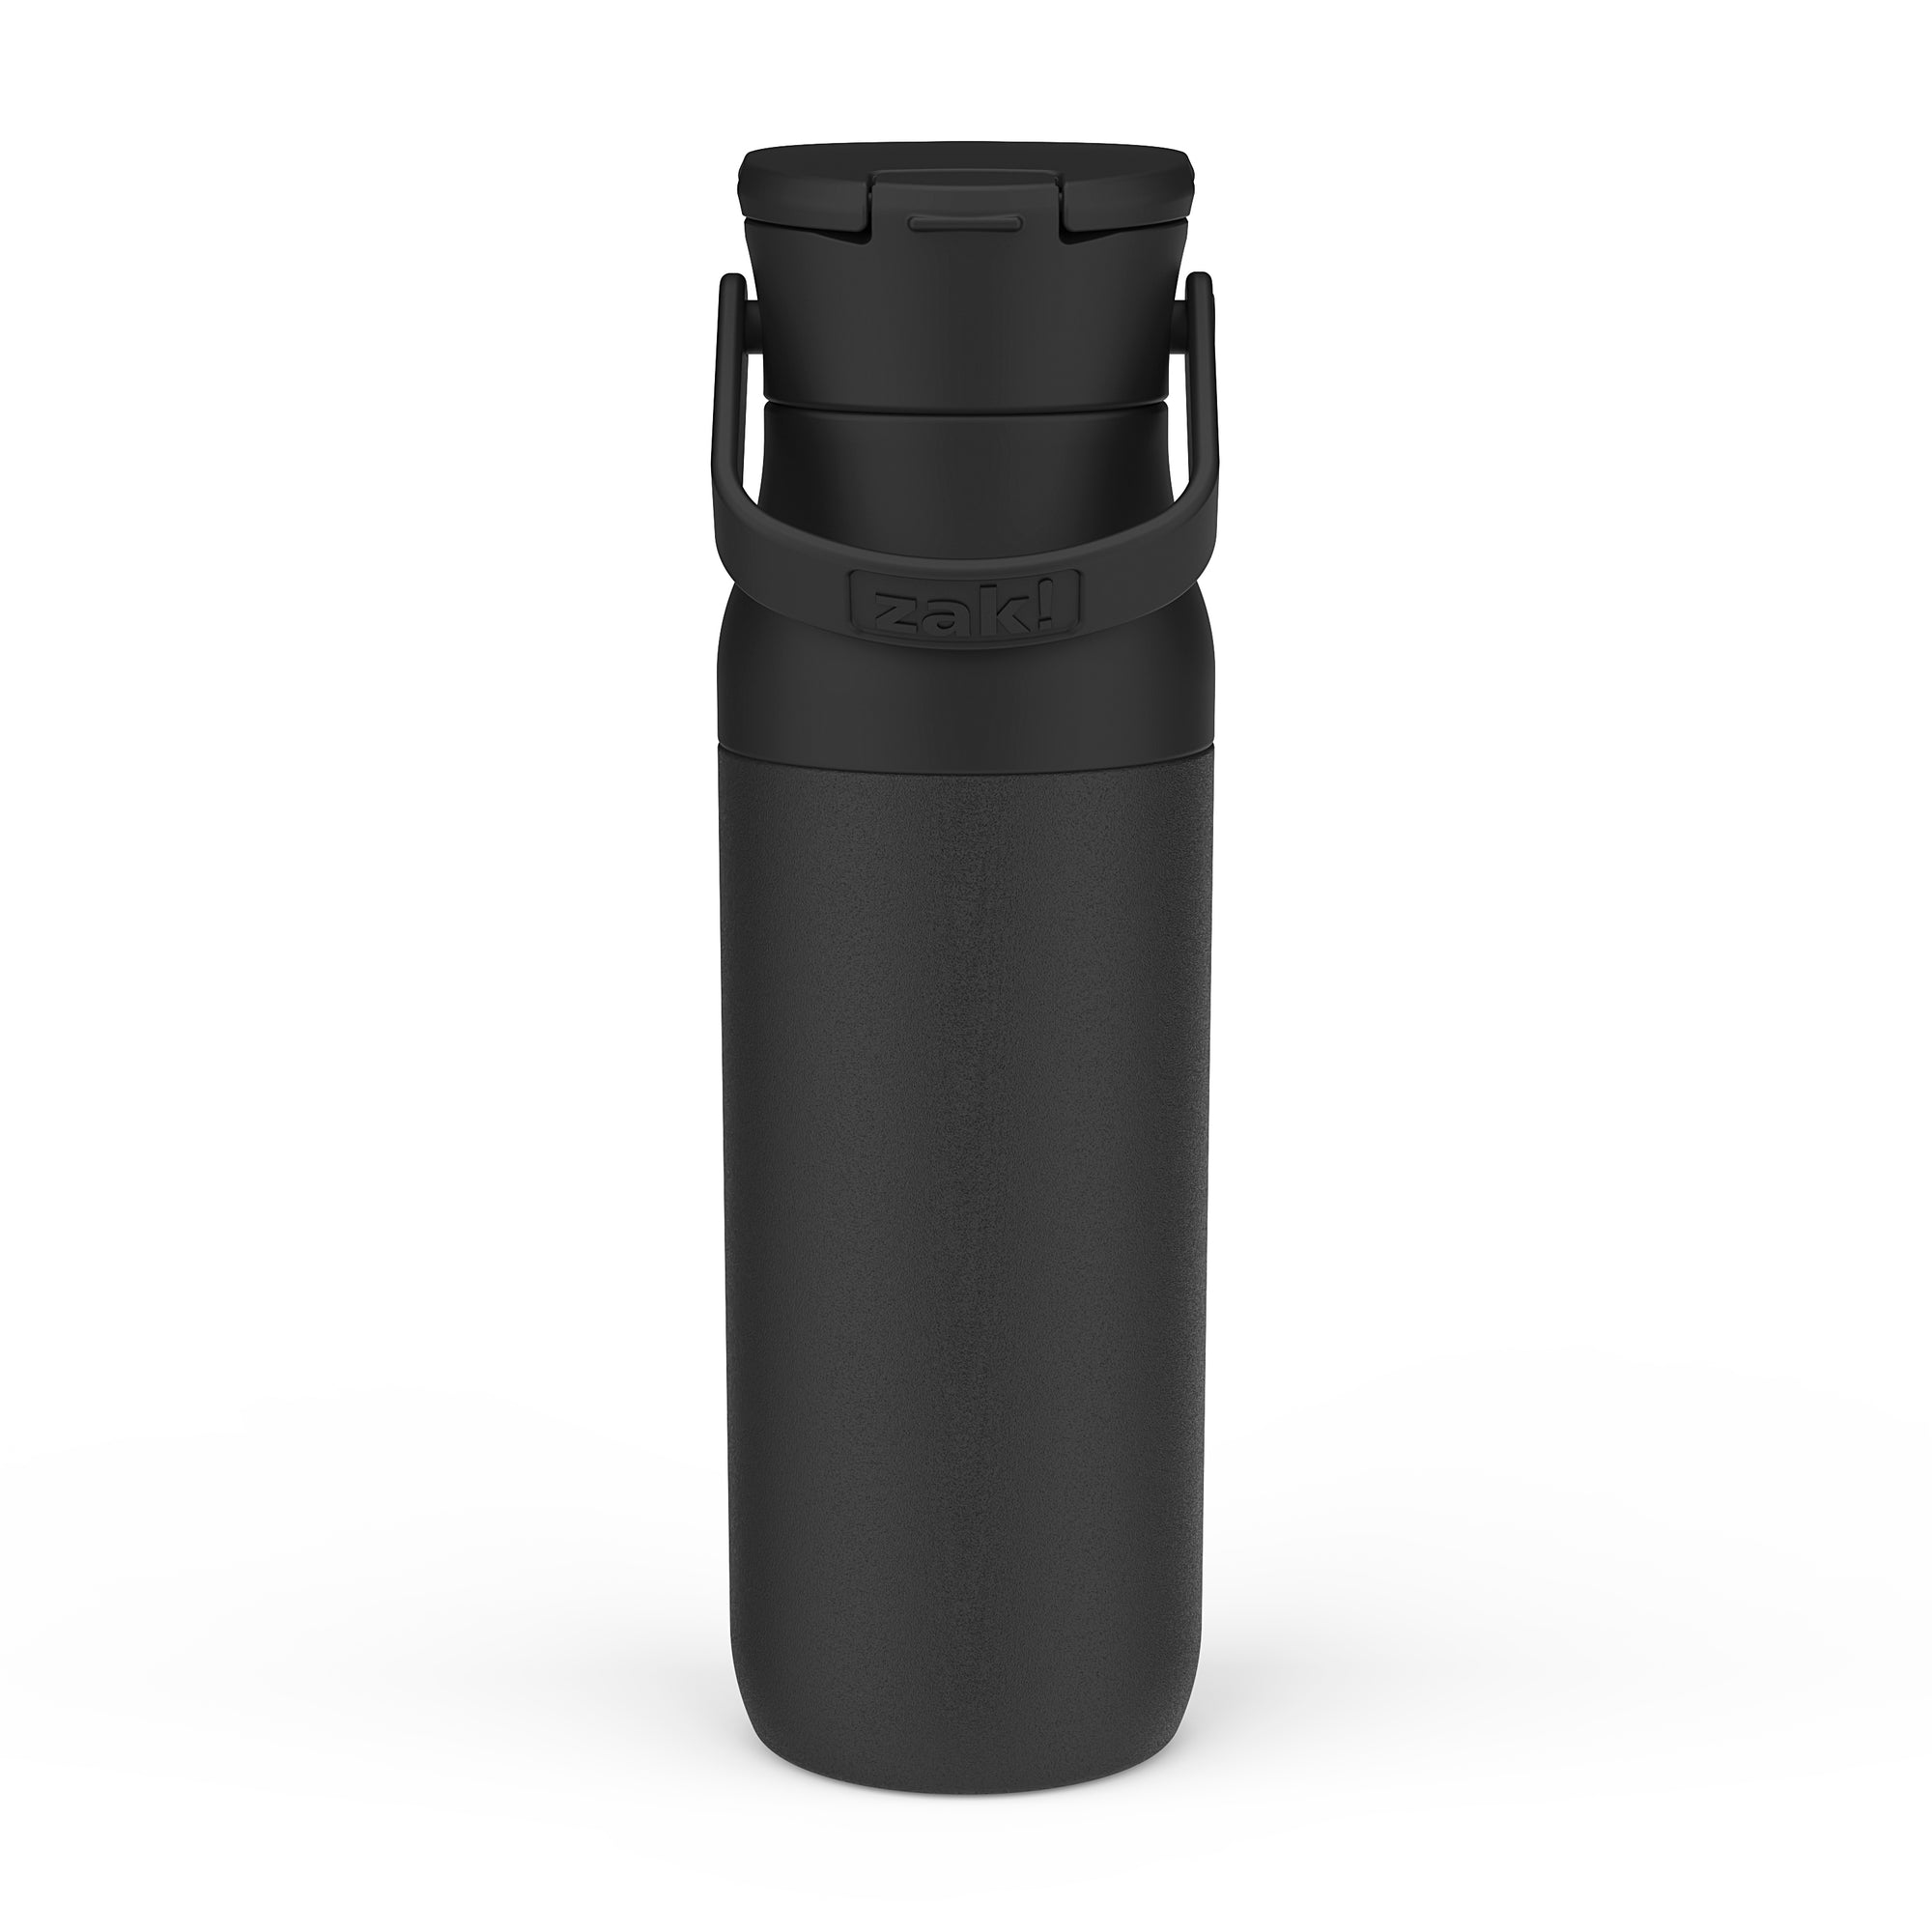 Harmony Recycled Stainless Steel Insulated Water Bottle with Sip Opening - Ebony, 32 ounces